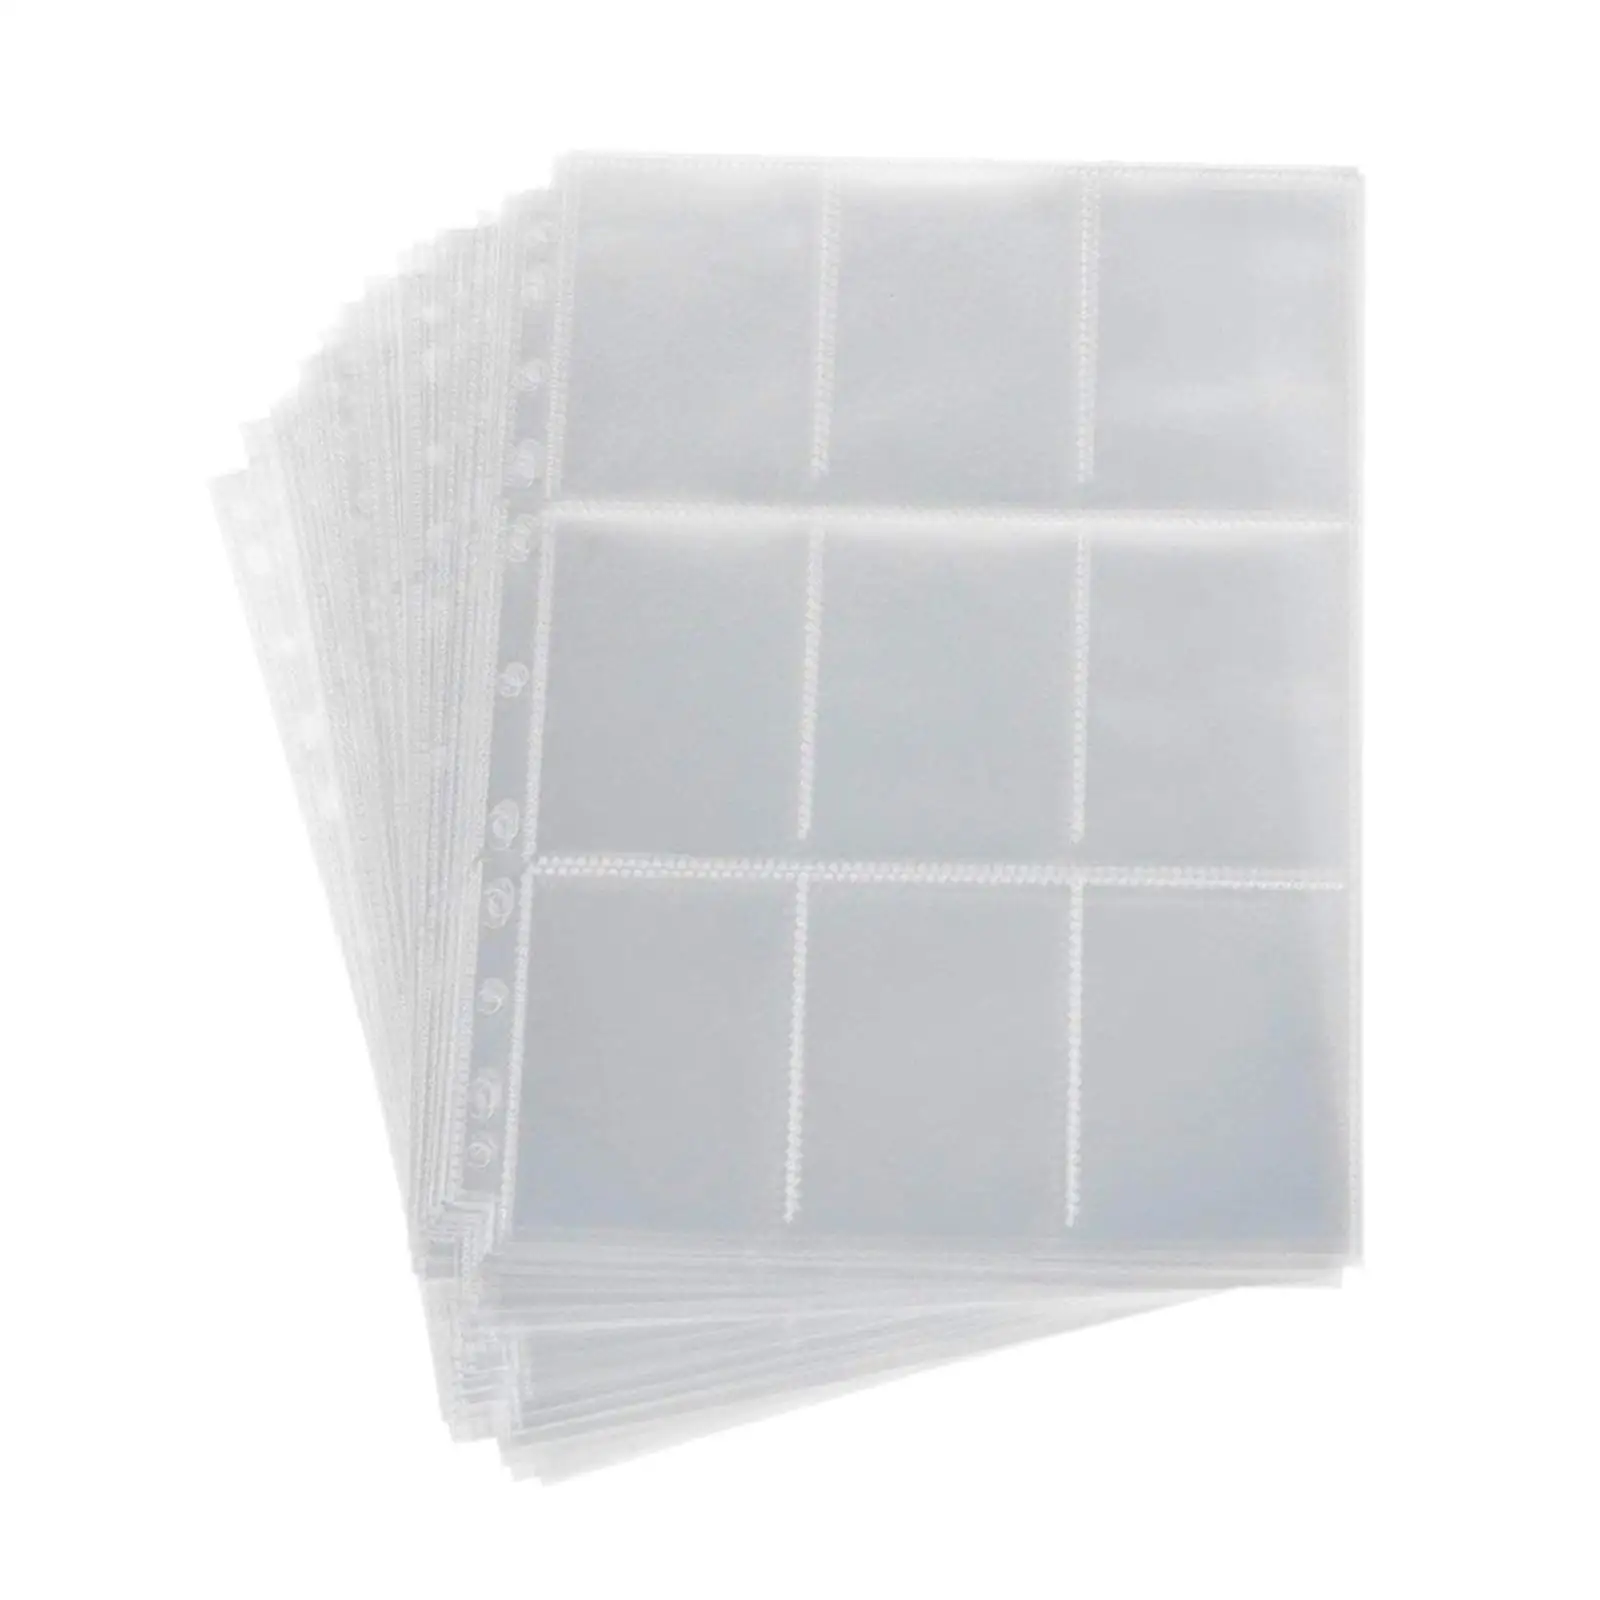 10 Sheets (90 Pockets) of Premium 9 Pocket  Protectors for  Cards,Gathering Cards,  , etc..